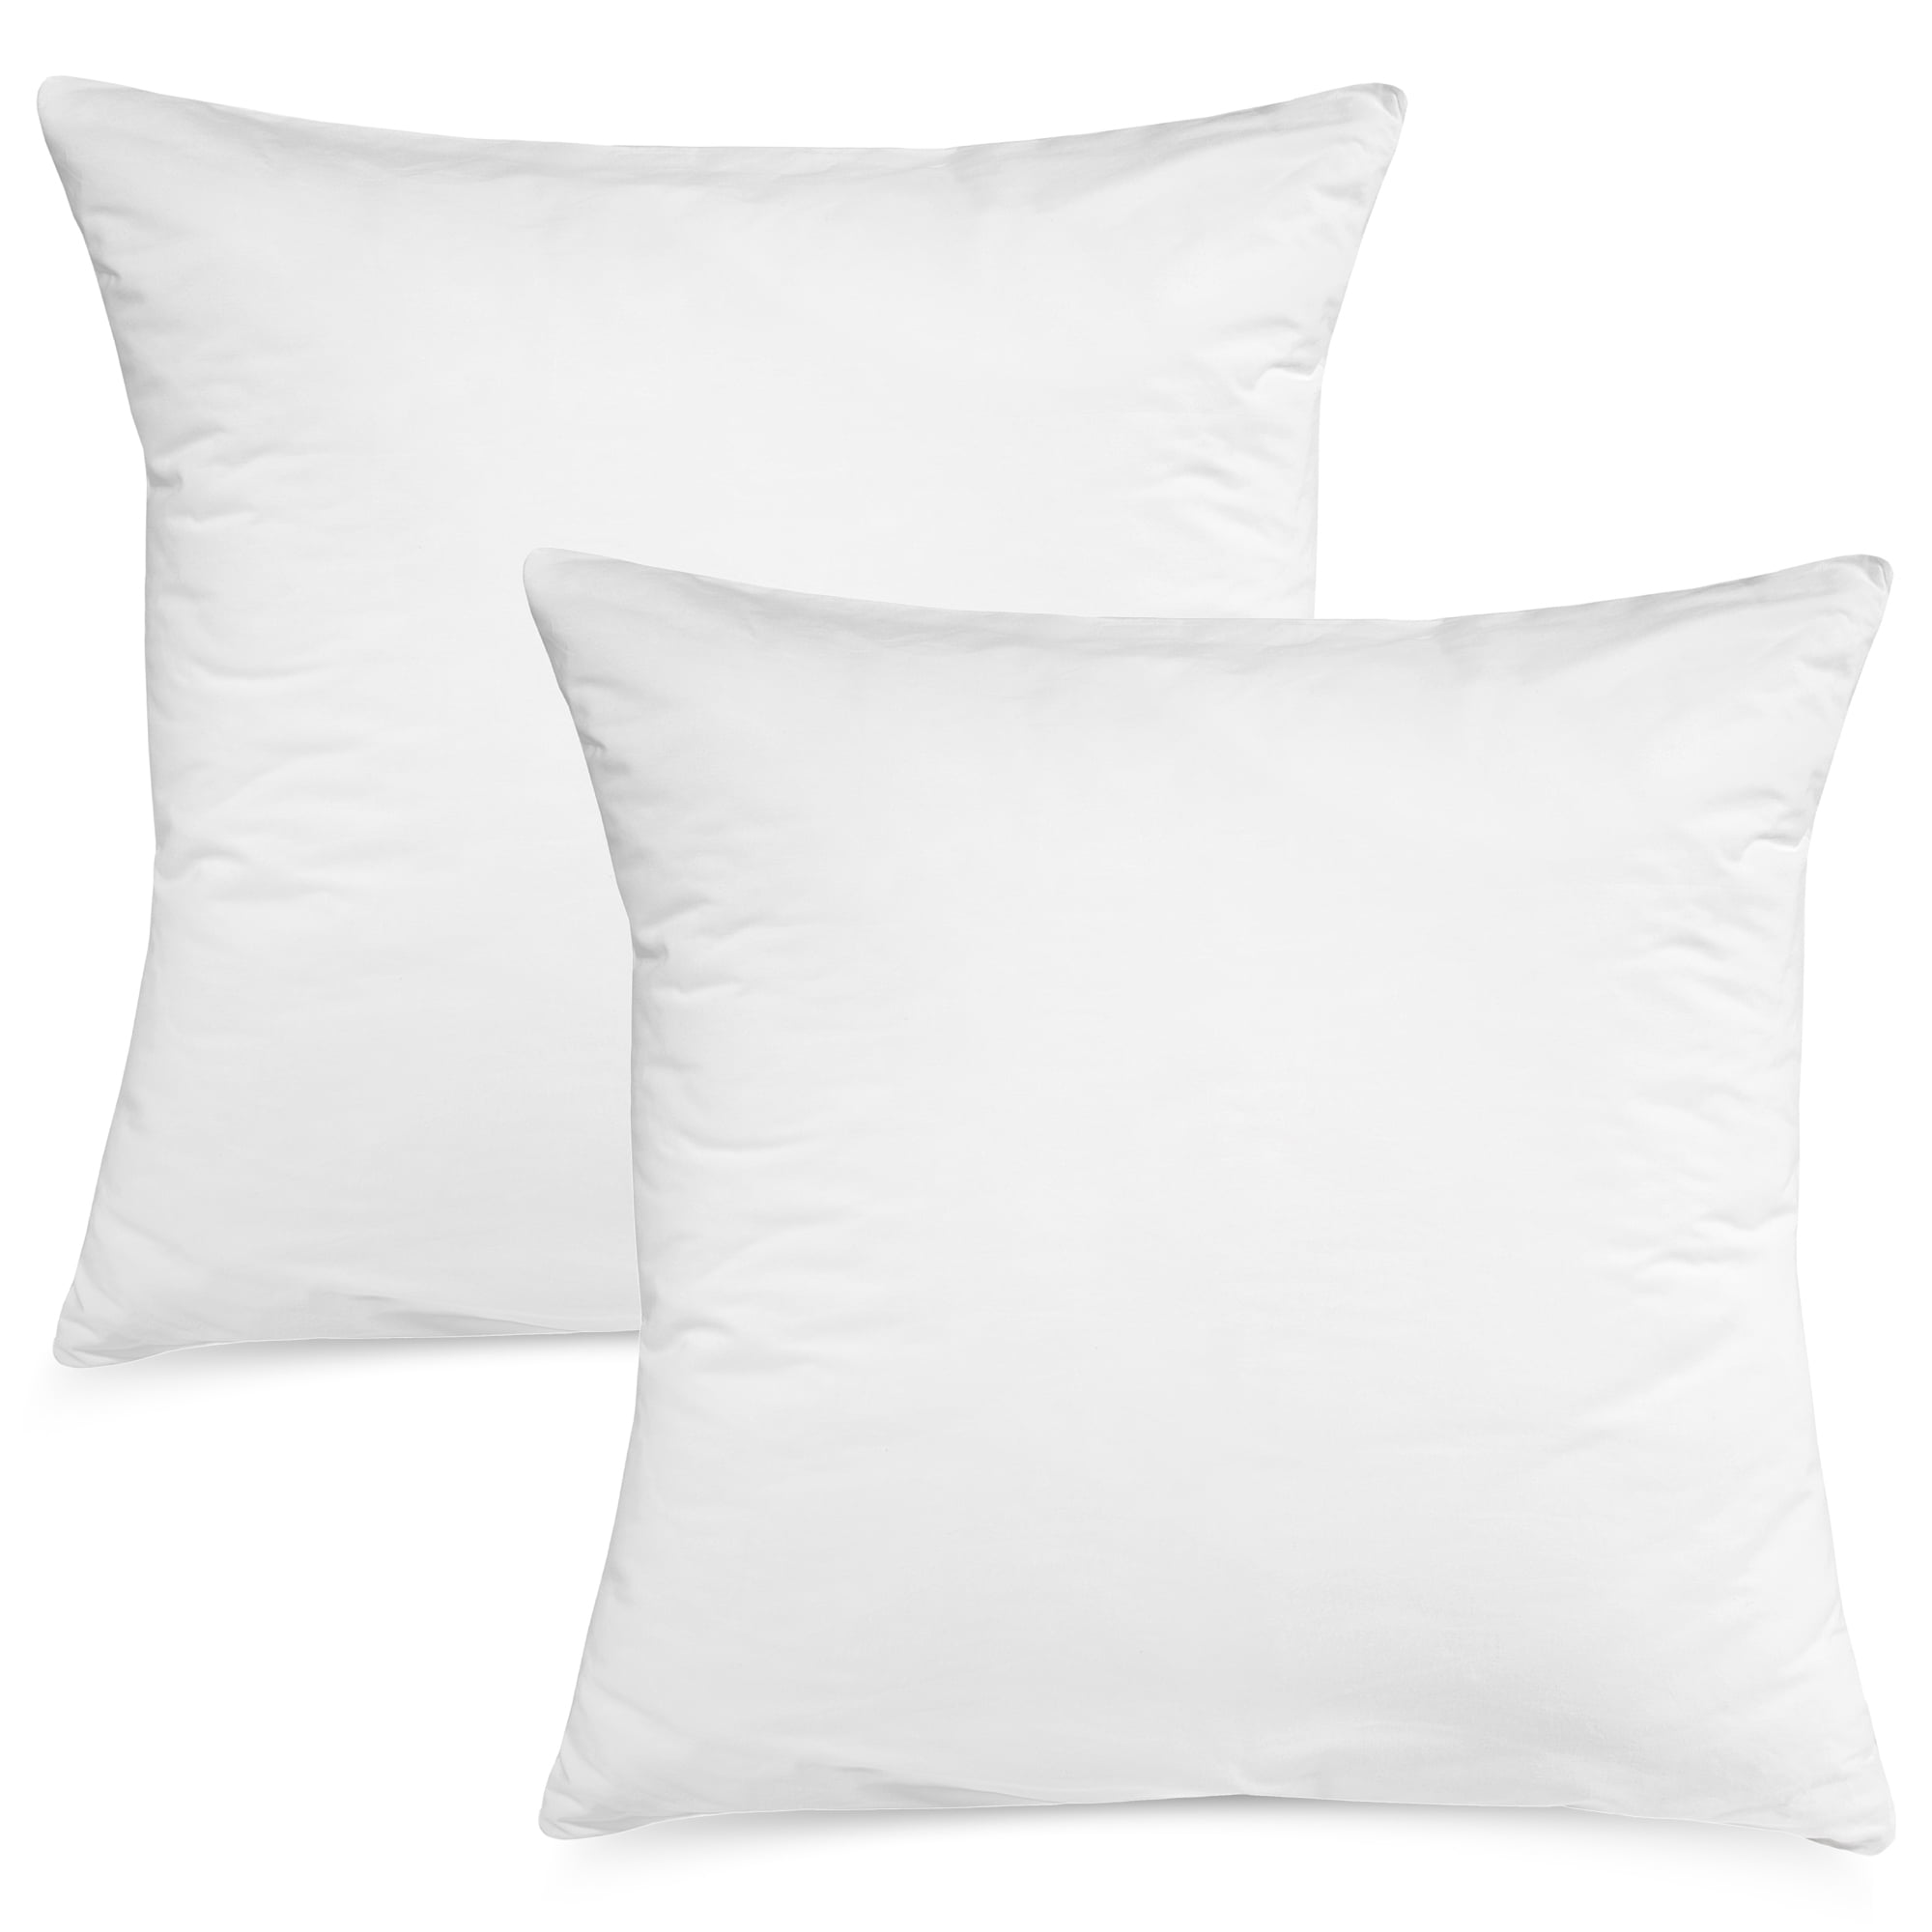 PAL Fabric (Set of 2) Premium Cotton Feel Microfiber Square Sham Pillow  Insert 18X18 Made in China - China Pillow and Cushion price